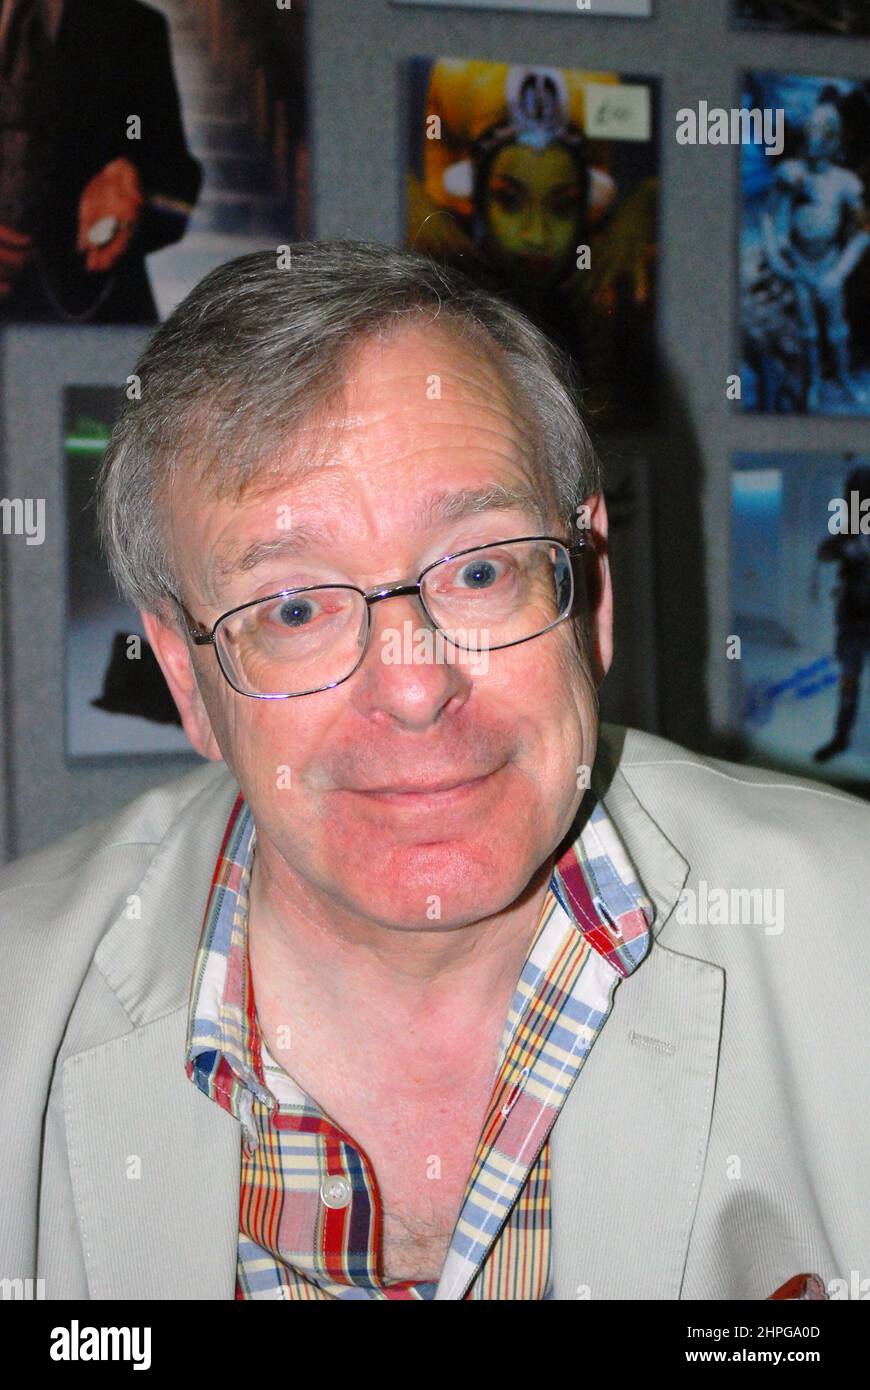 John Leeson (John Francis Christopher Ducker) is an English TV, film. stage, voice actor & wine expert known for Bungle in Rainbow & K9 in Doctor Who. Stock Photo